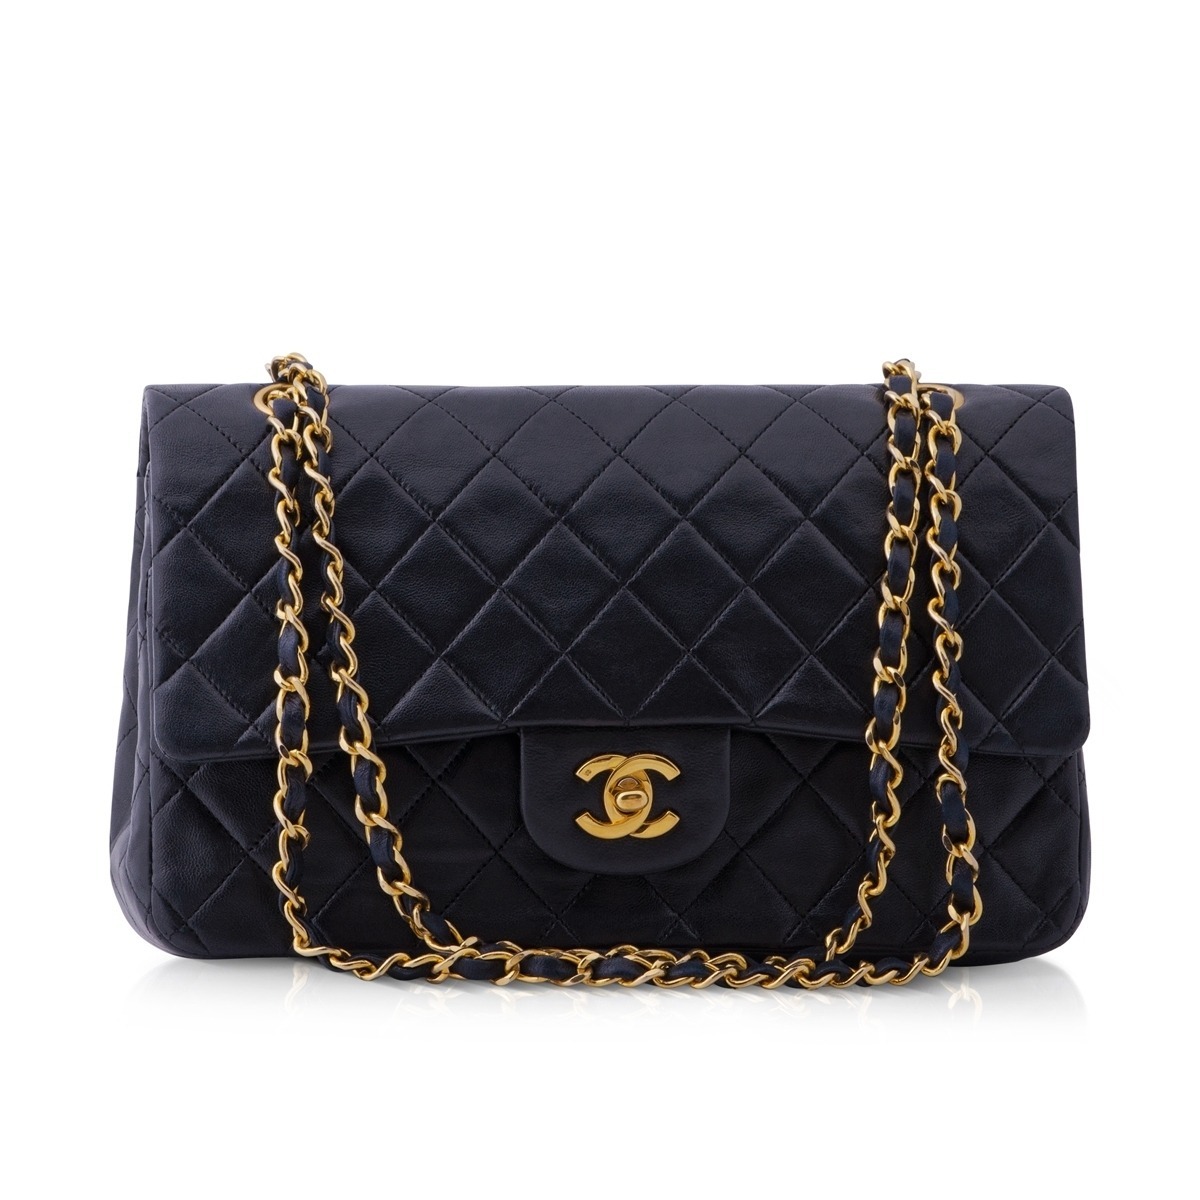 Formalist - Chanel Double Flap 2.55 Iconic Bag